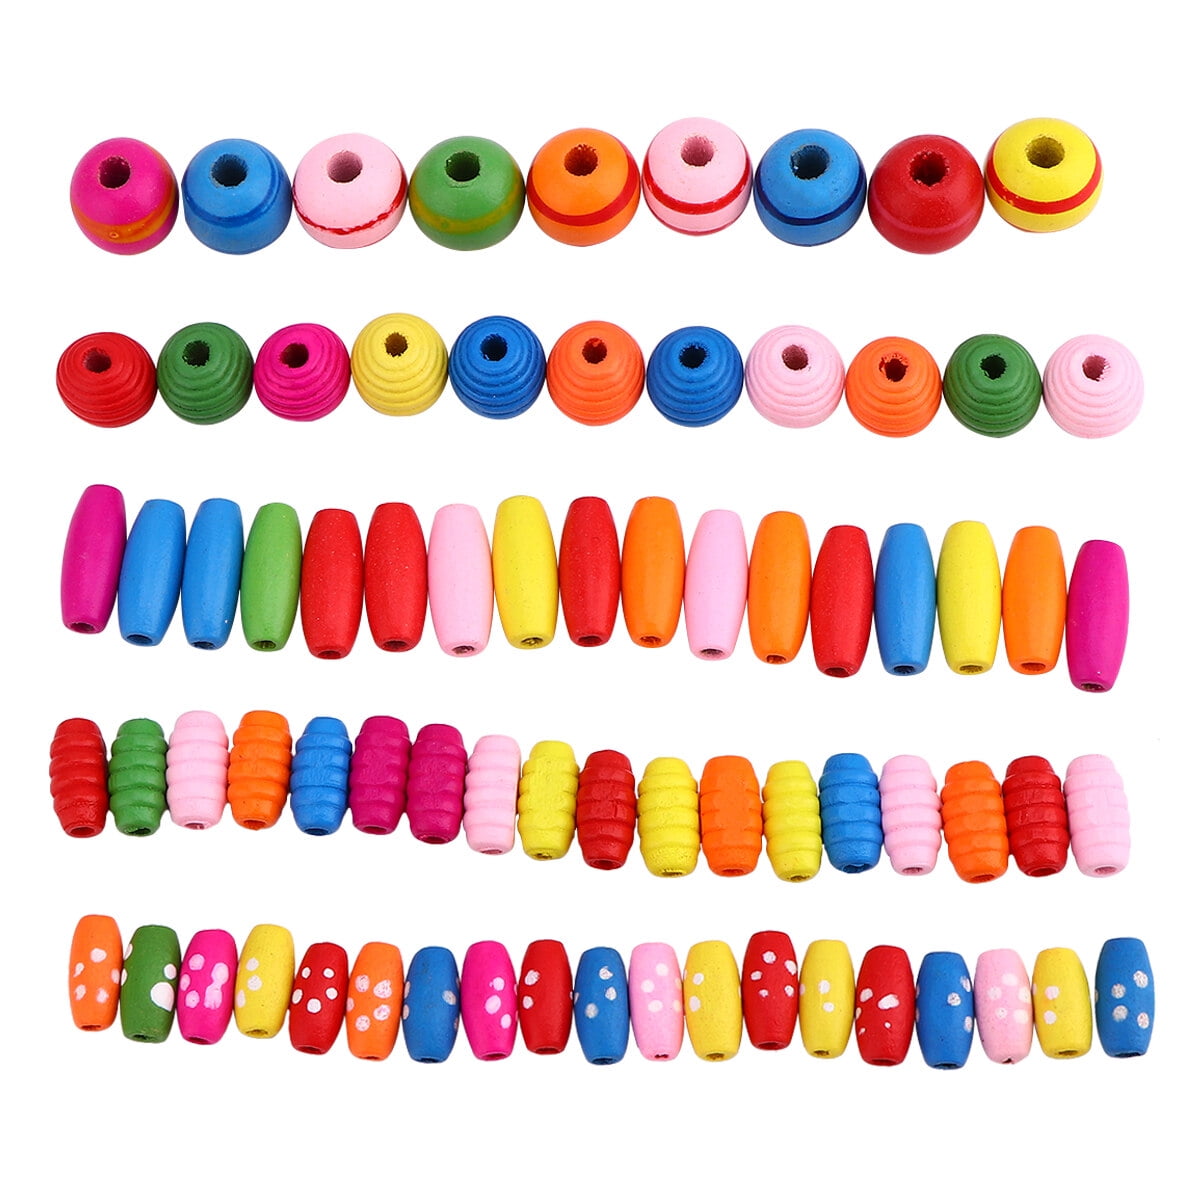 Funtopia Pony Beads for Jewelry Making, 48 Colors Plastic Beads Kit for Friendship Bracelet Making, Polymer Kandi Beads with Letter Beads for Necklace